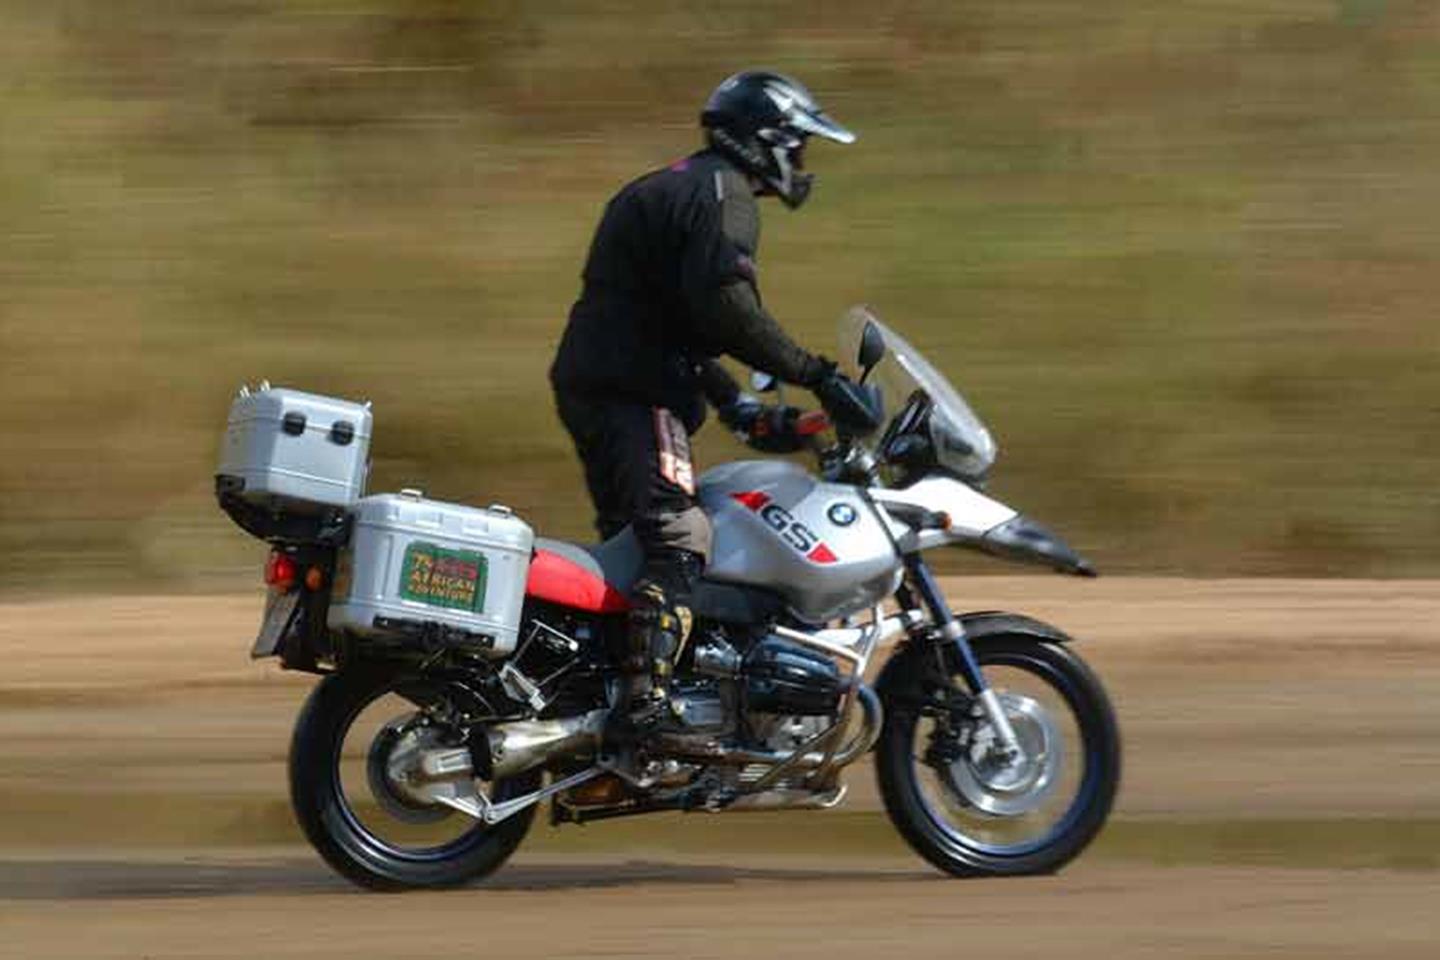 BMW R1150GS ADVENTURE (2002-2005) Motorcycle Review